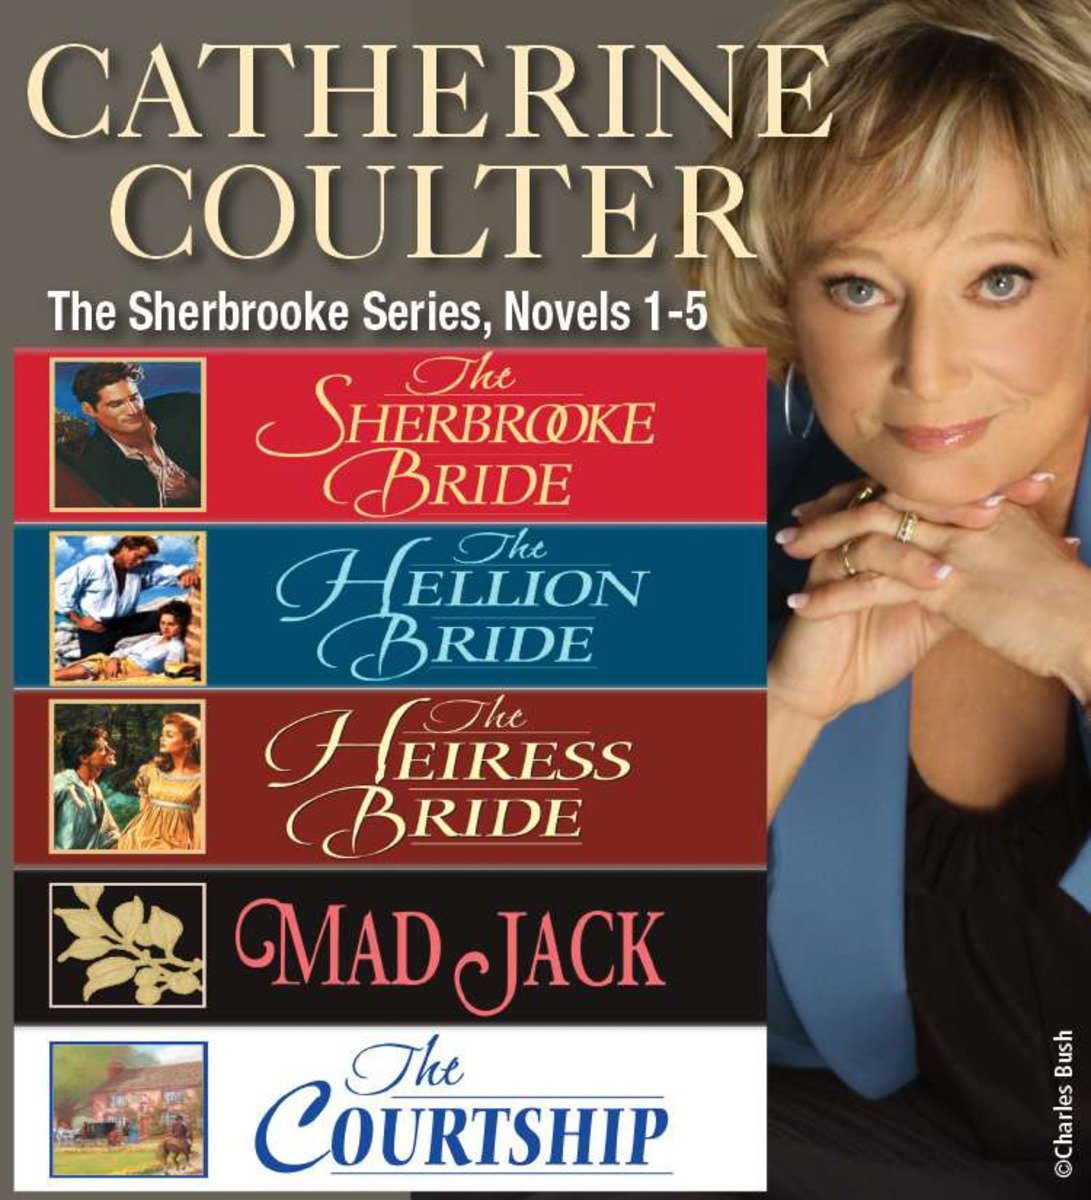 Umschlagbild für Catherine Coulter The Sherbrooke Series Novels 1-5 [electronic resource] :